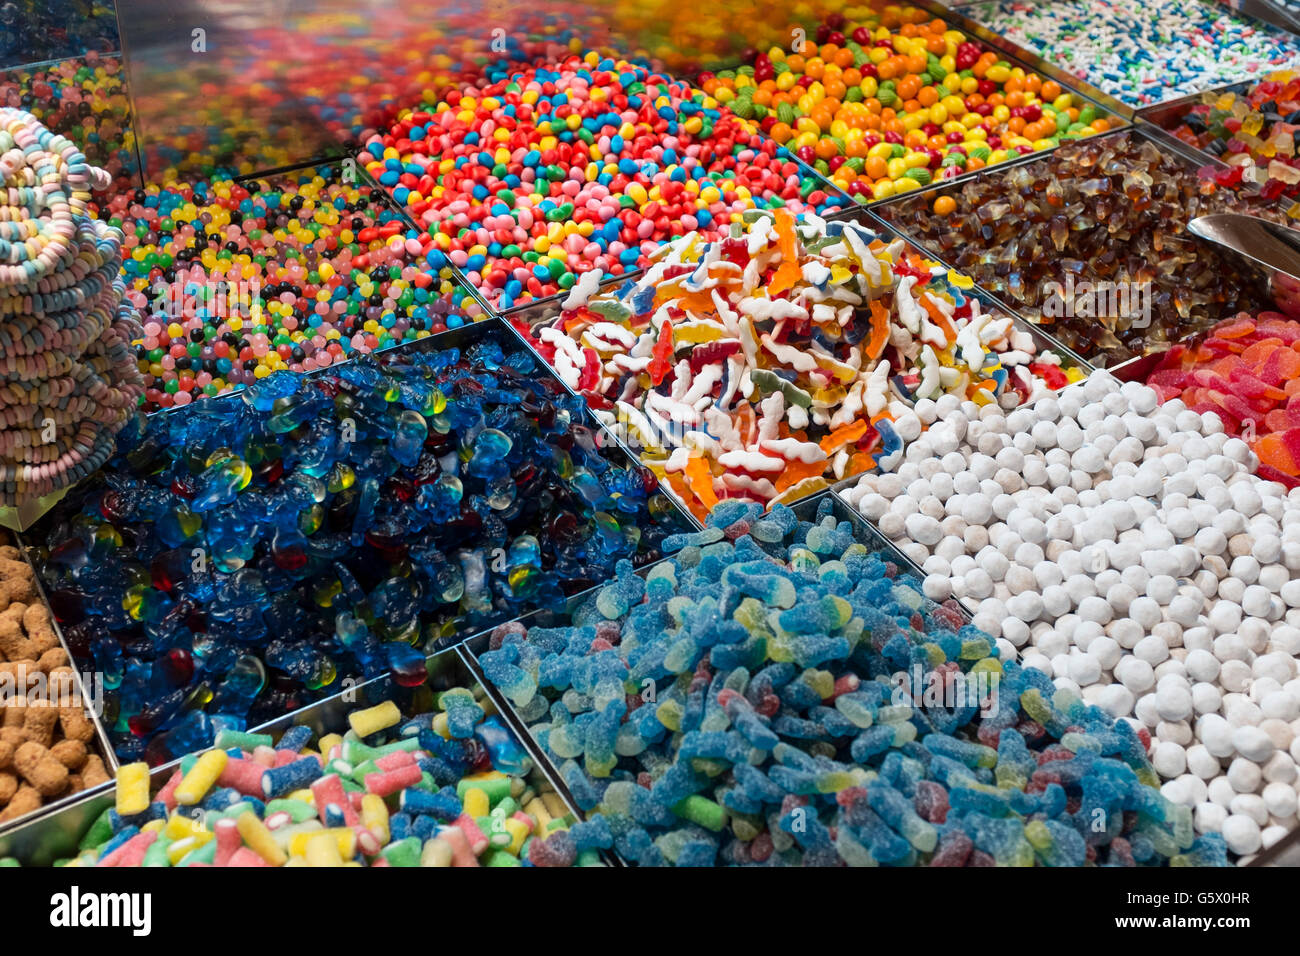 Display of colourful sweets, France Stock Photo